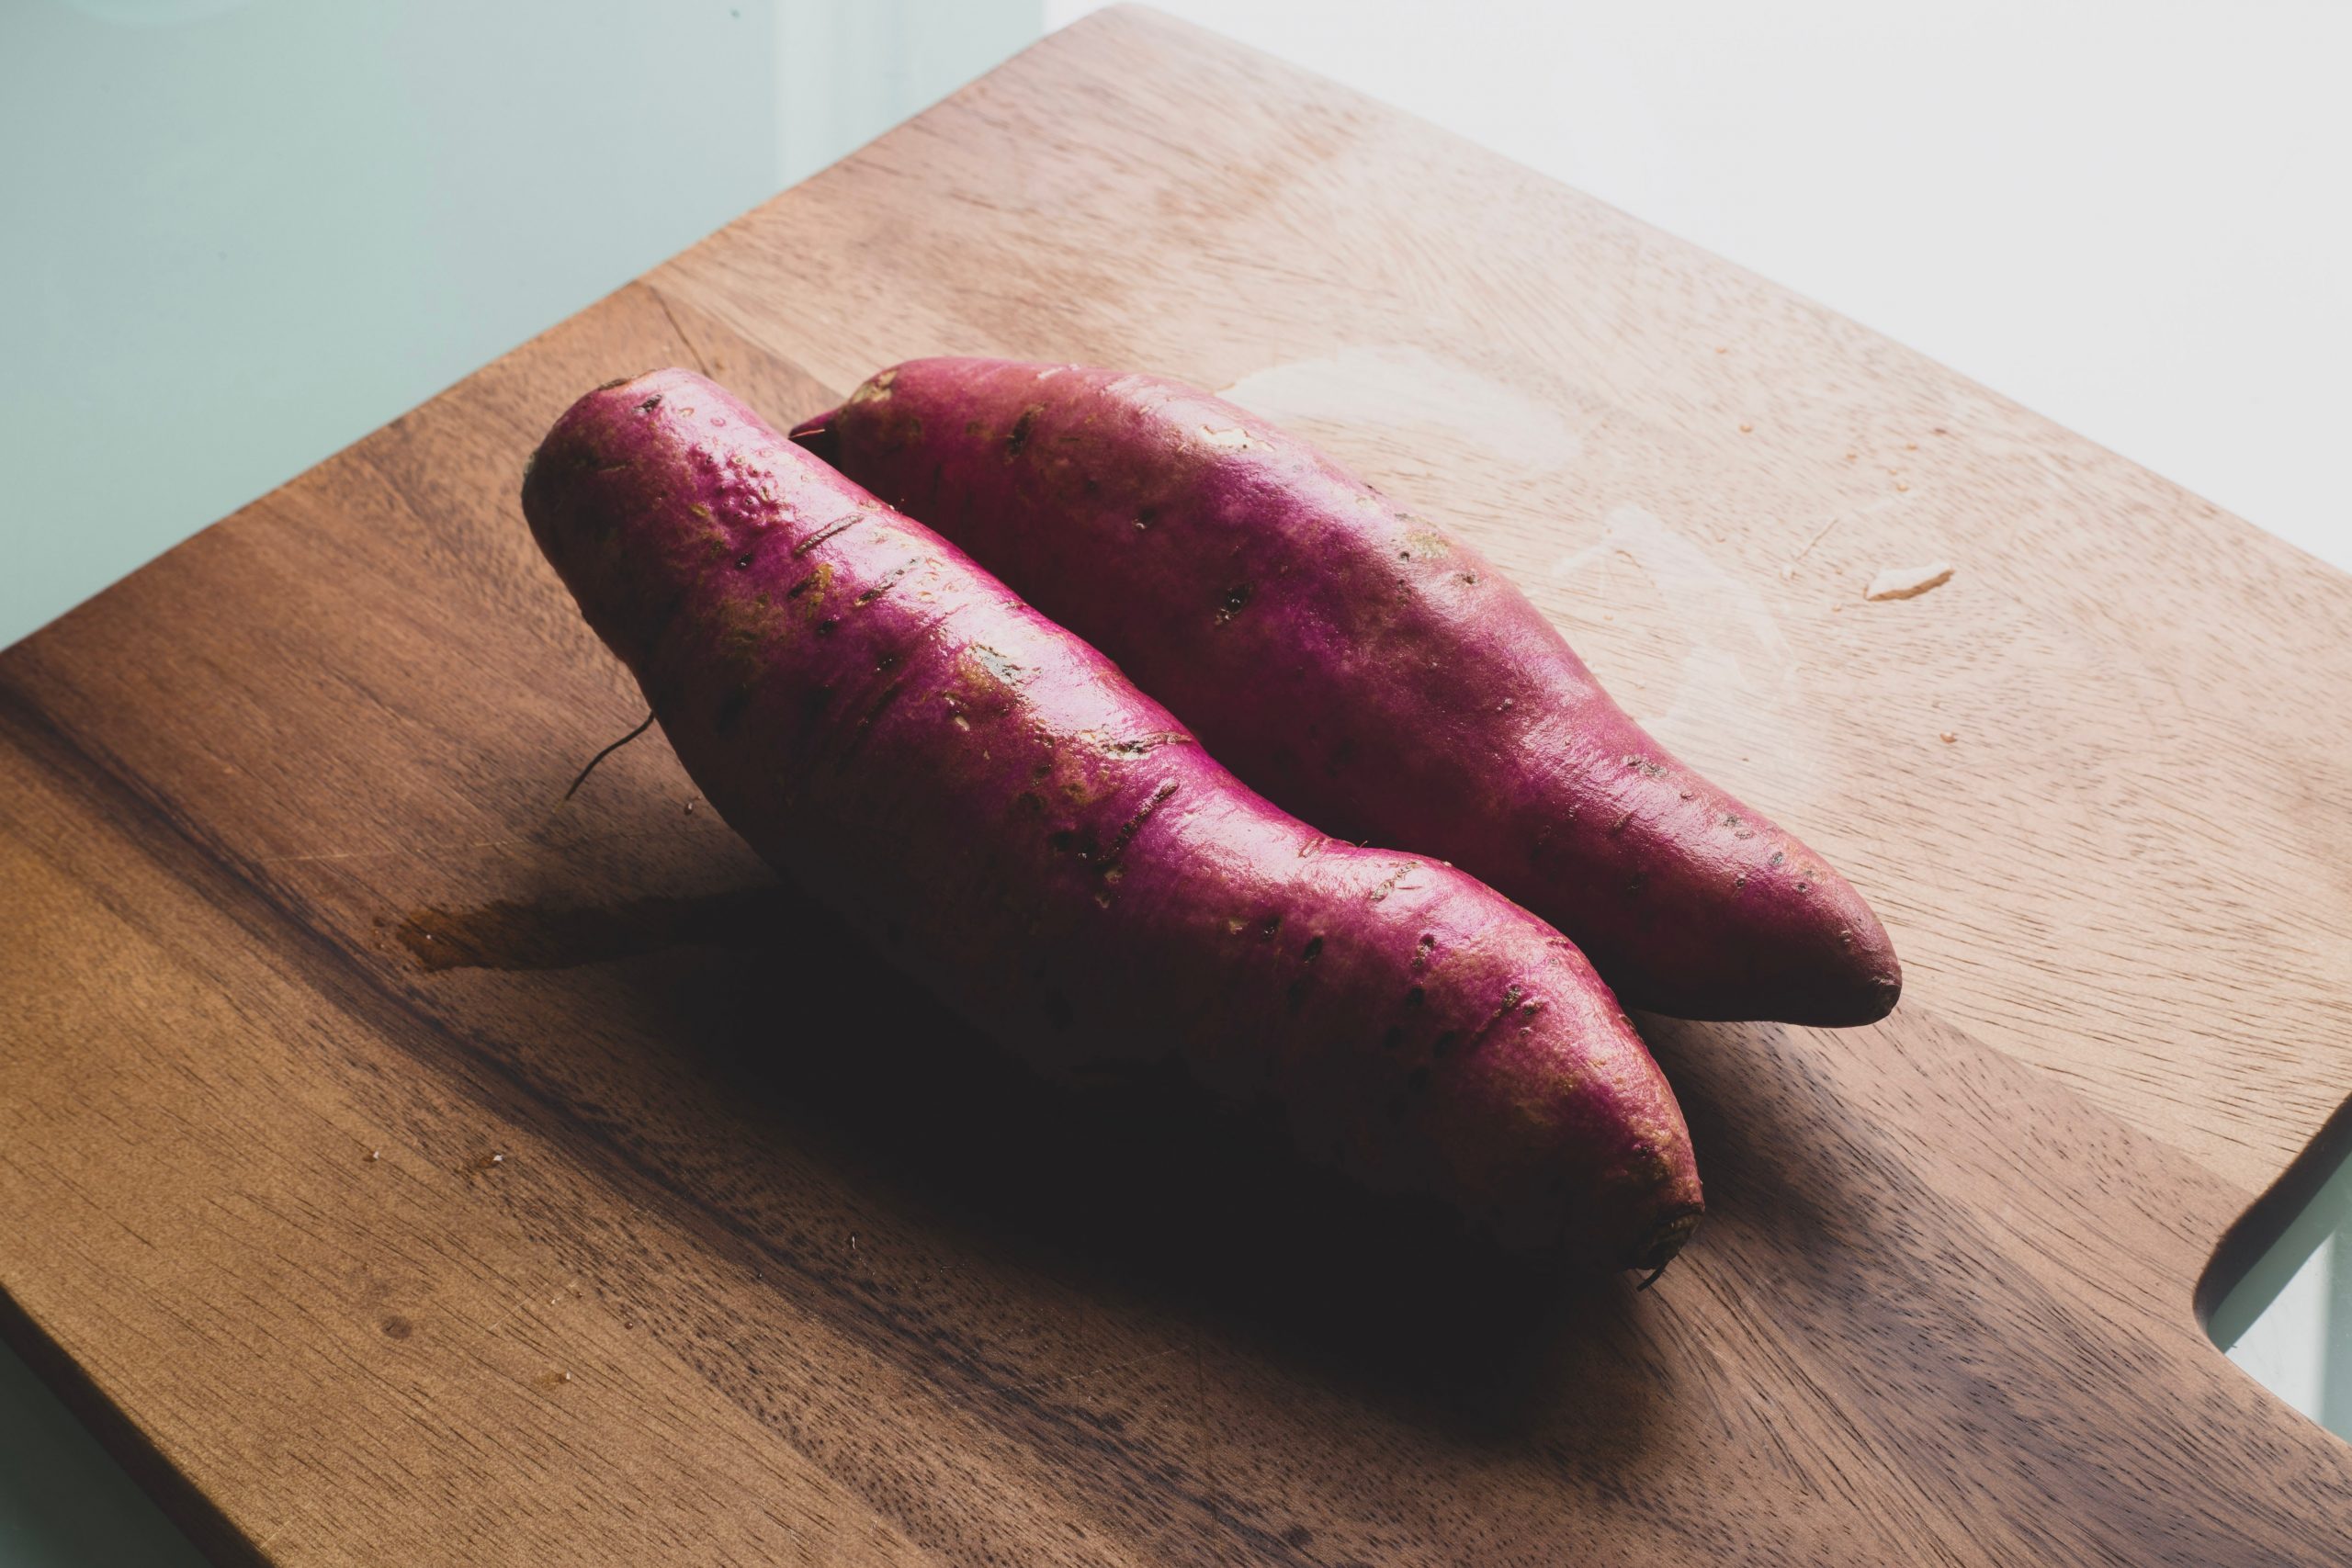 Is Sweet Potato A Root Or Stem?